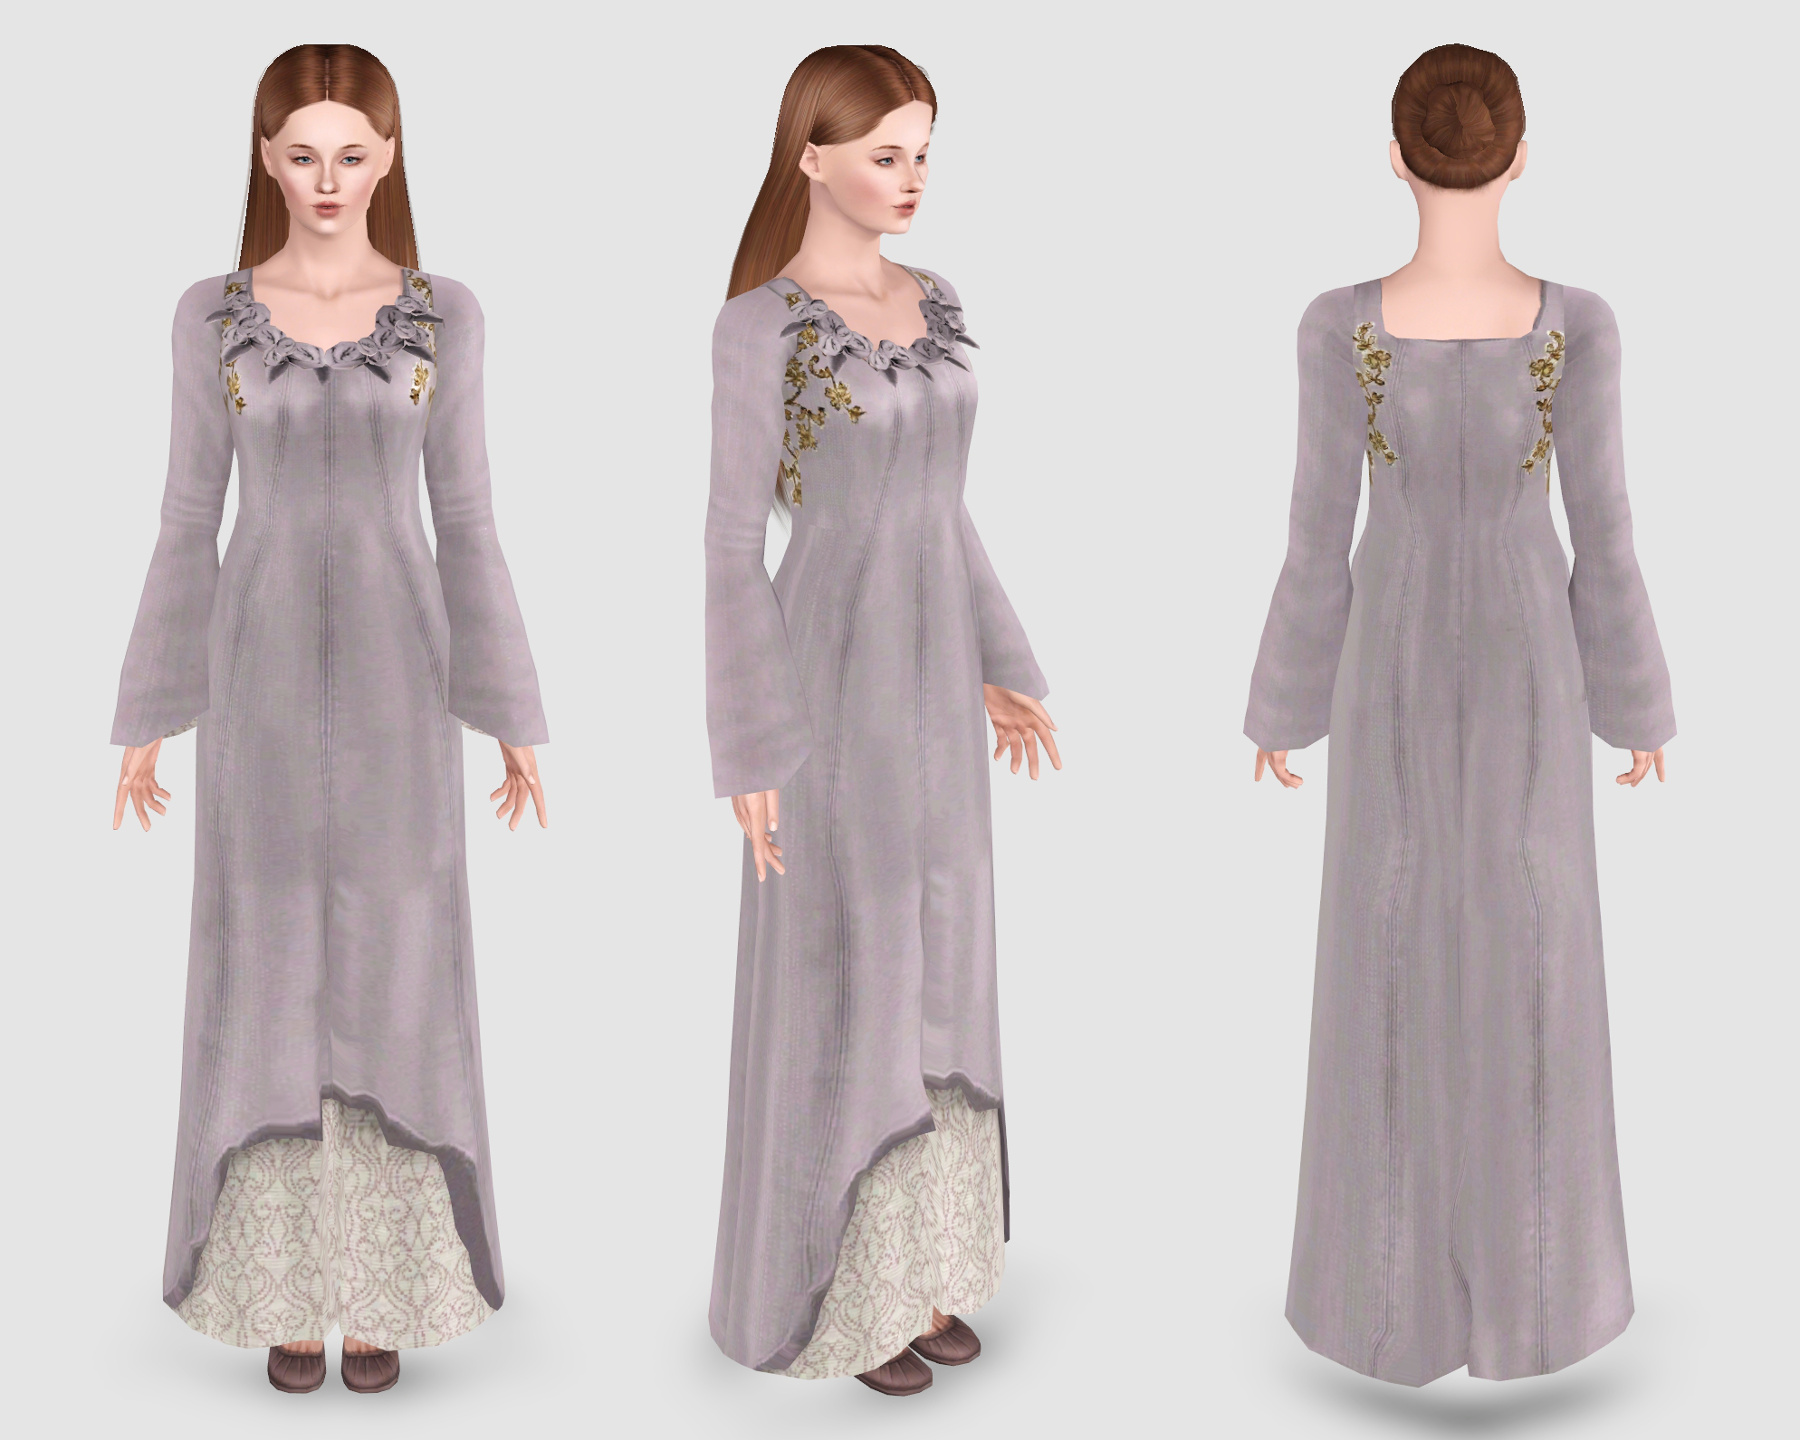 Mod The Sims - Game of Thrones: Sansa's Rose Gown